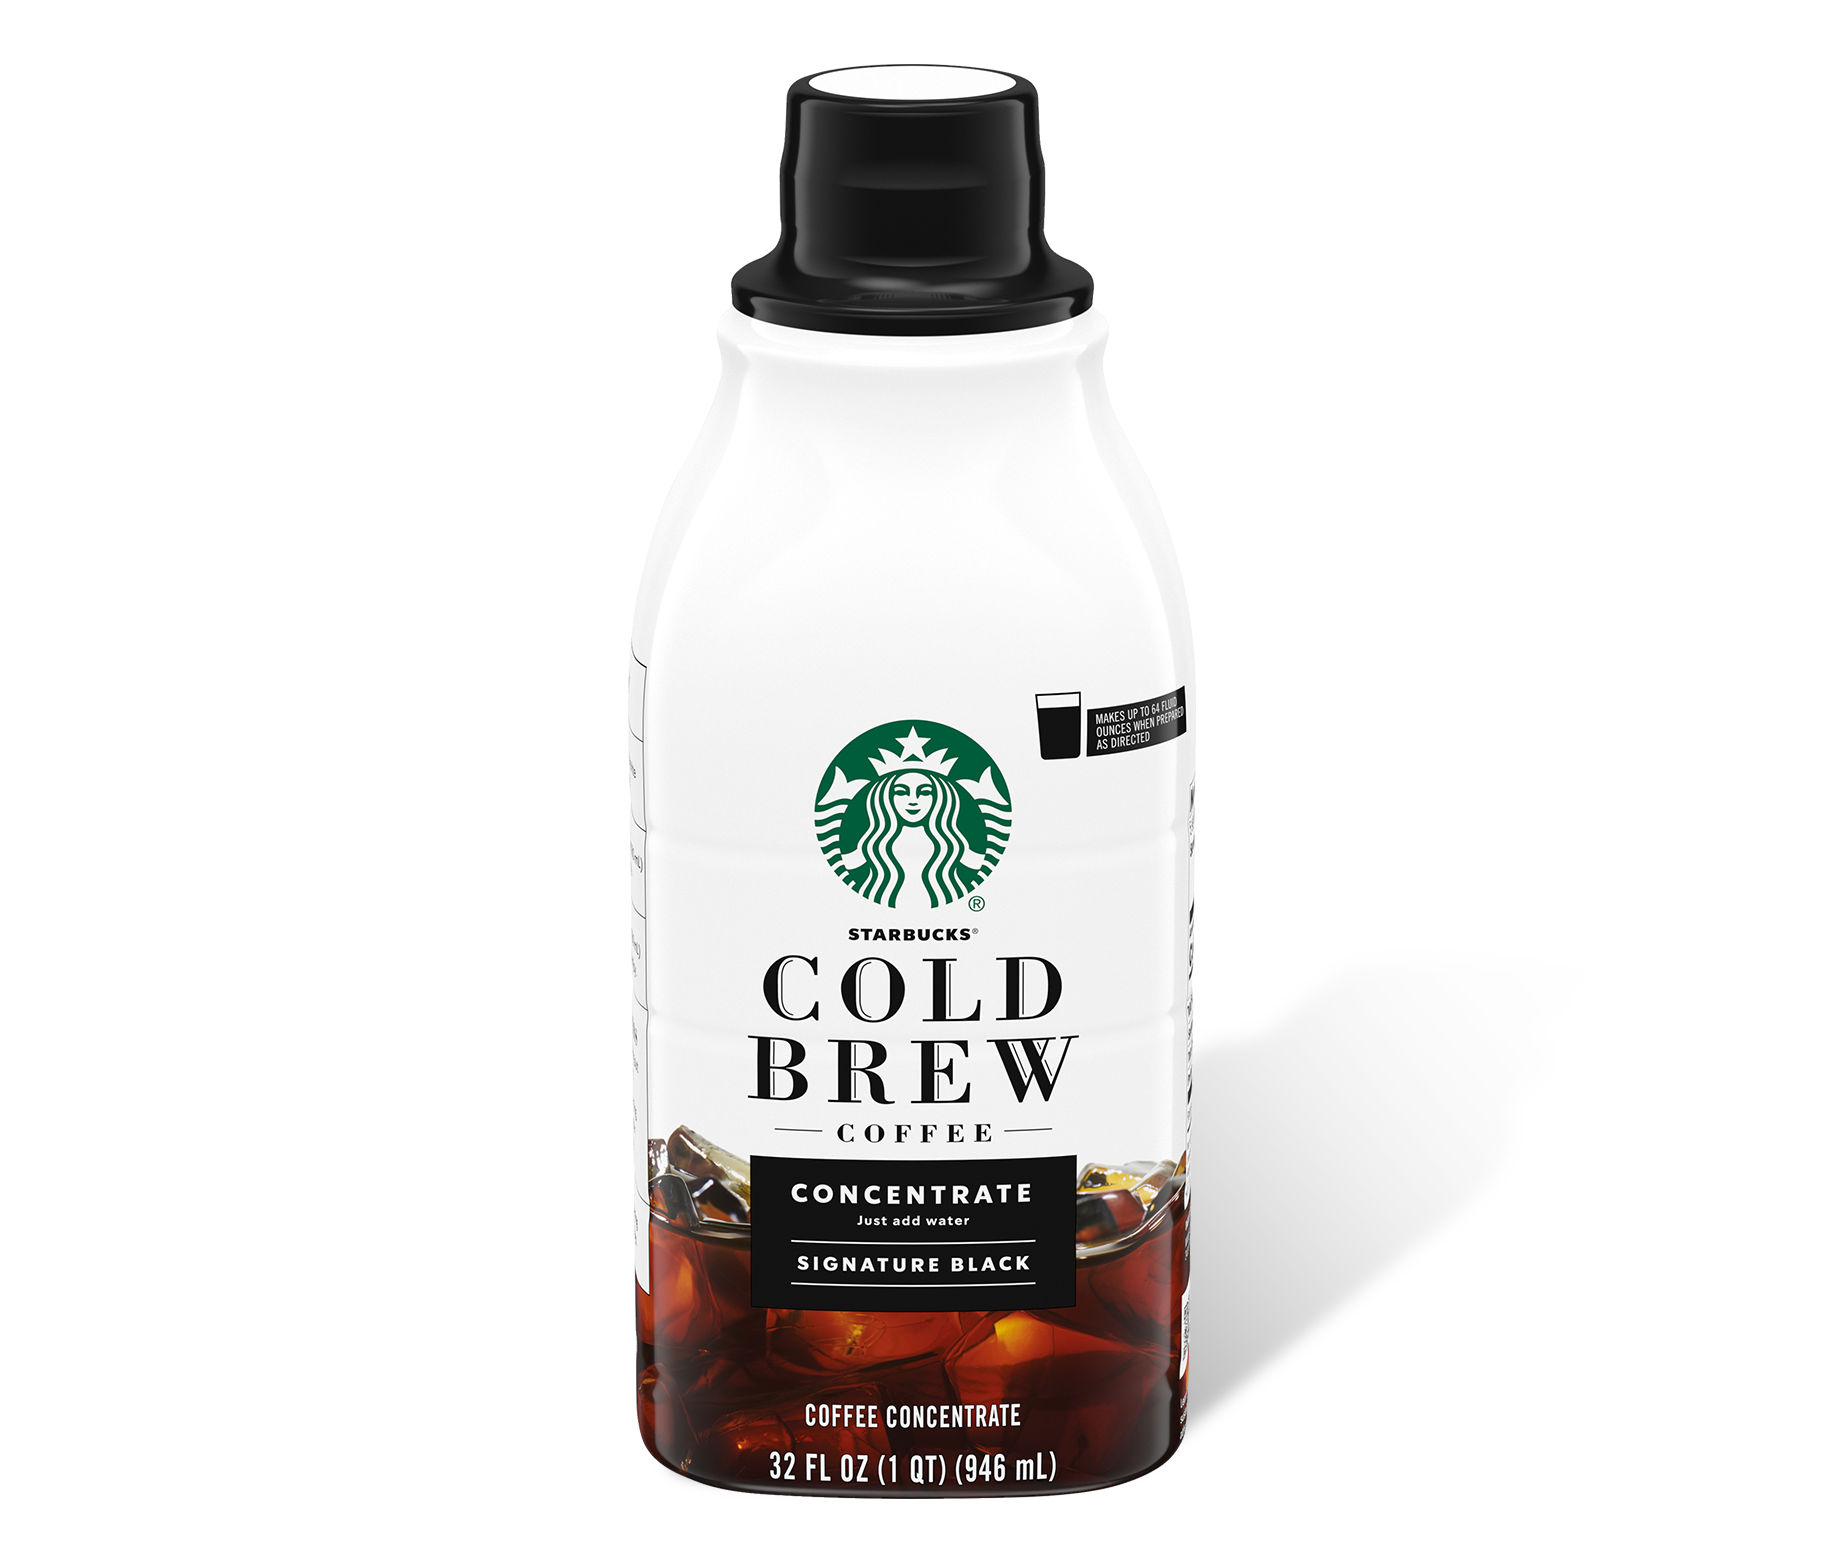 Javy Original Cold Brew Coffee Concentrate. 30 Cups Instant Coffee